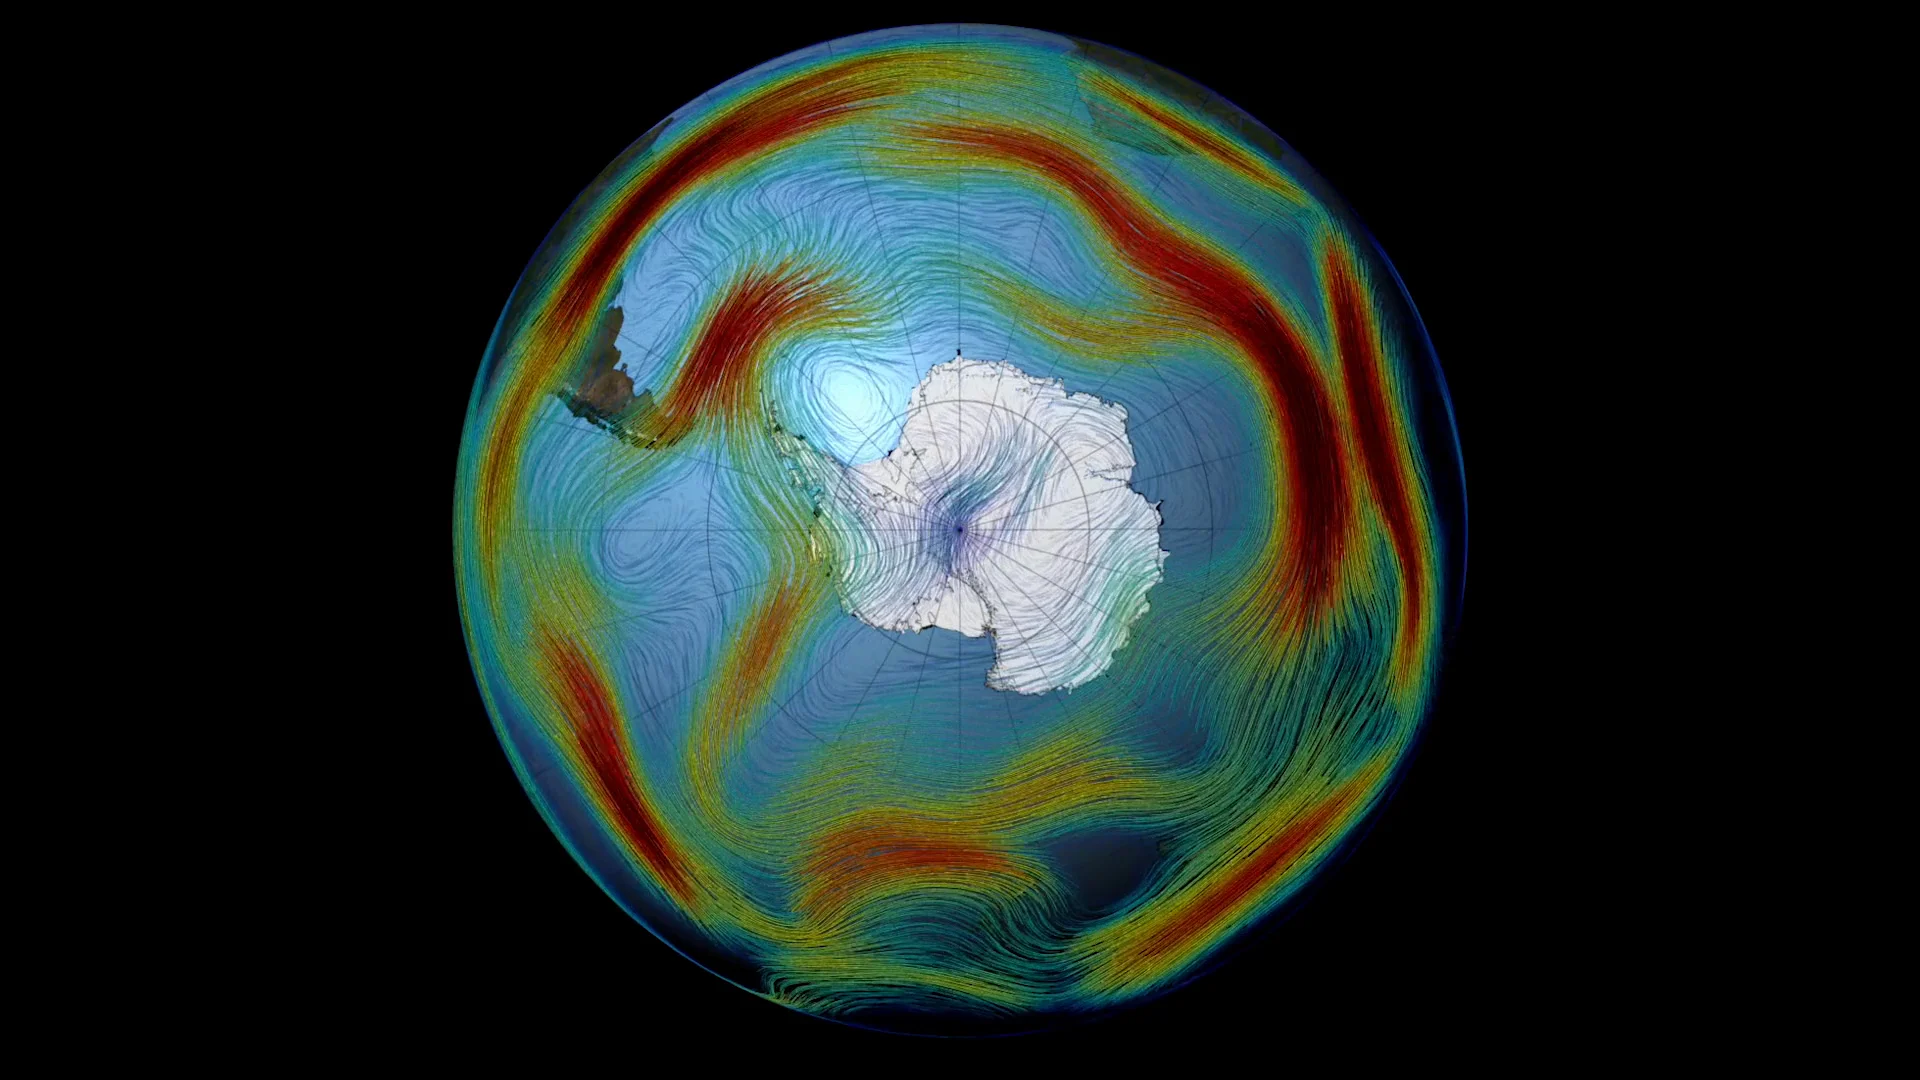 The Ozone Hole's recovery is helping stabilize southern hemisphere weather